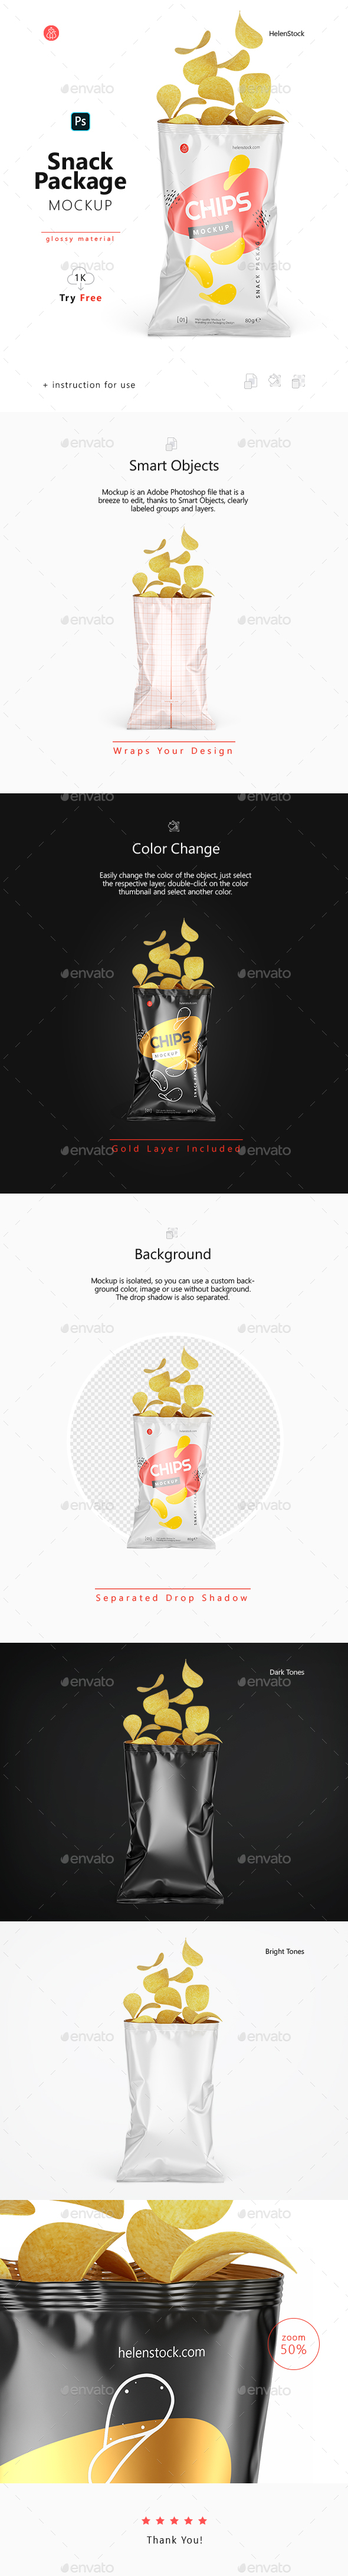 Download Opened Glossy Snack Package Mockup Front View By Helenstock Graphicriver PSD Mockup Templates